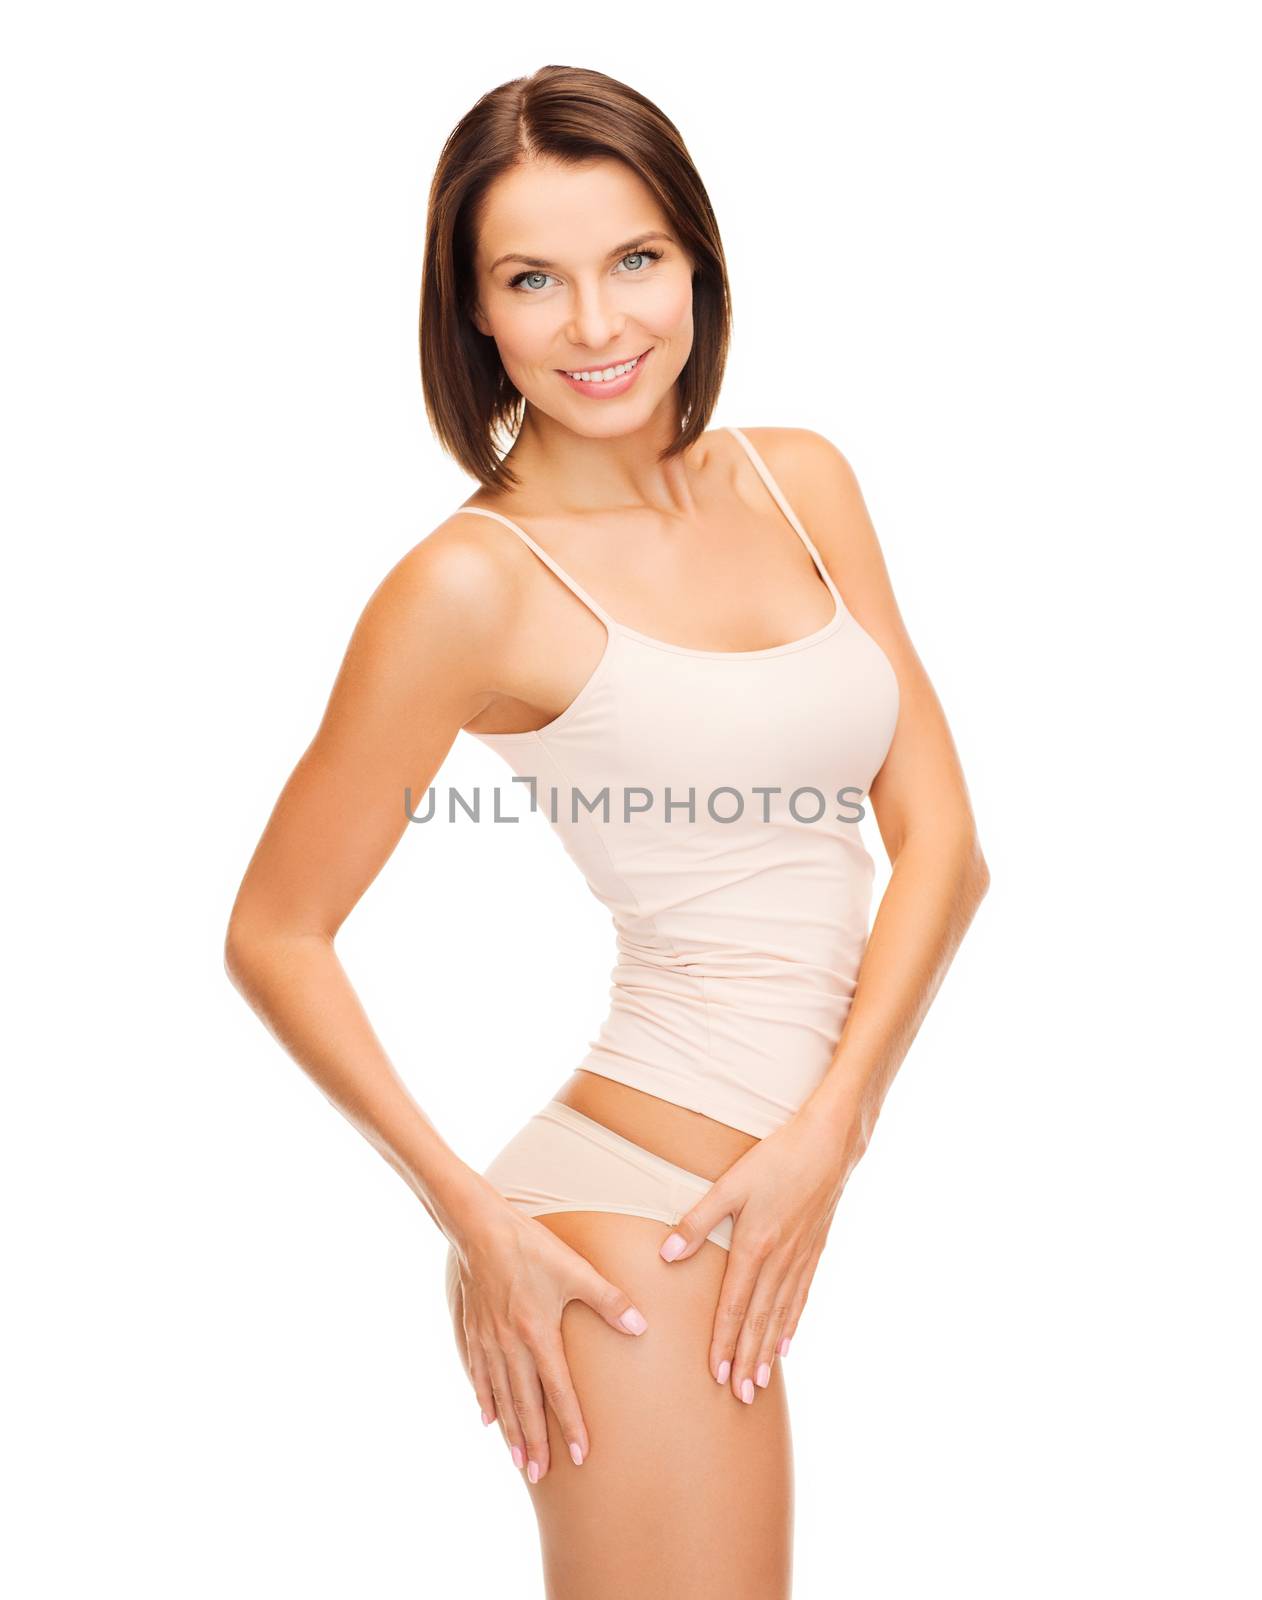 woman in cotton underwear showing slimming concept by dolgachov